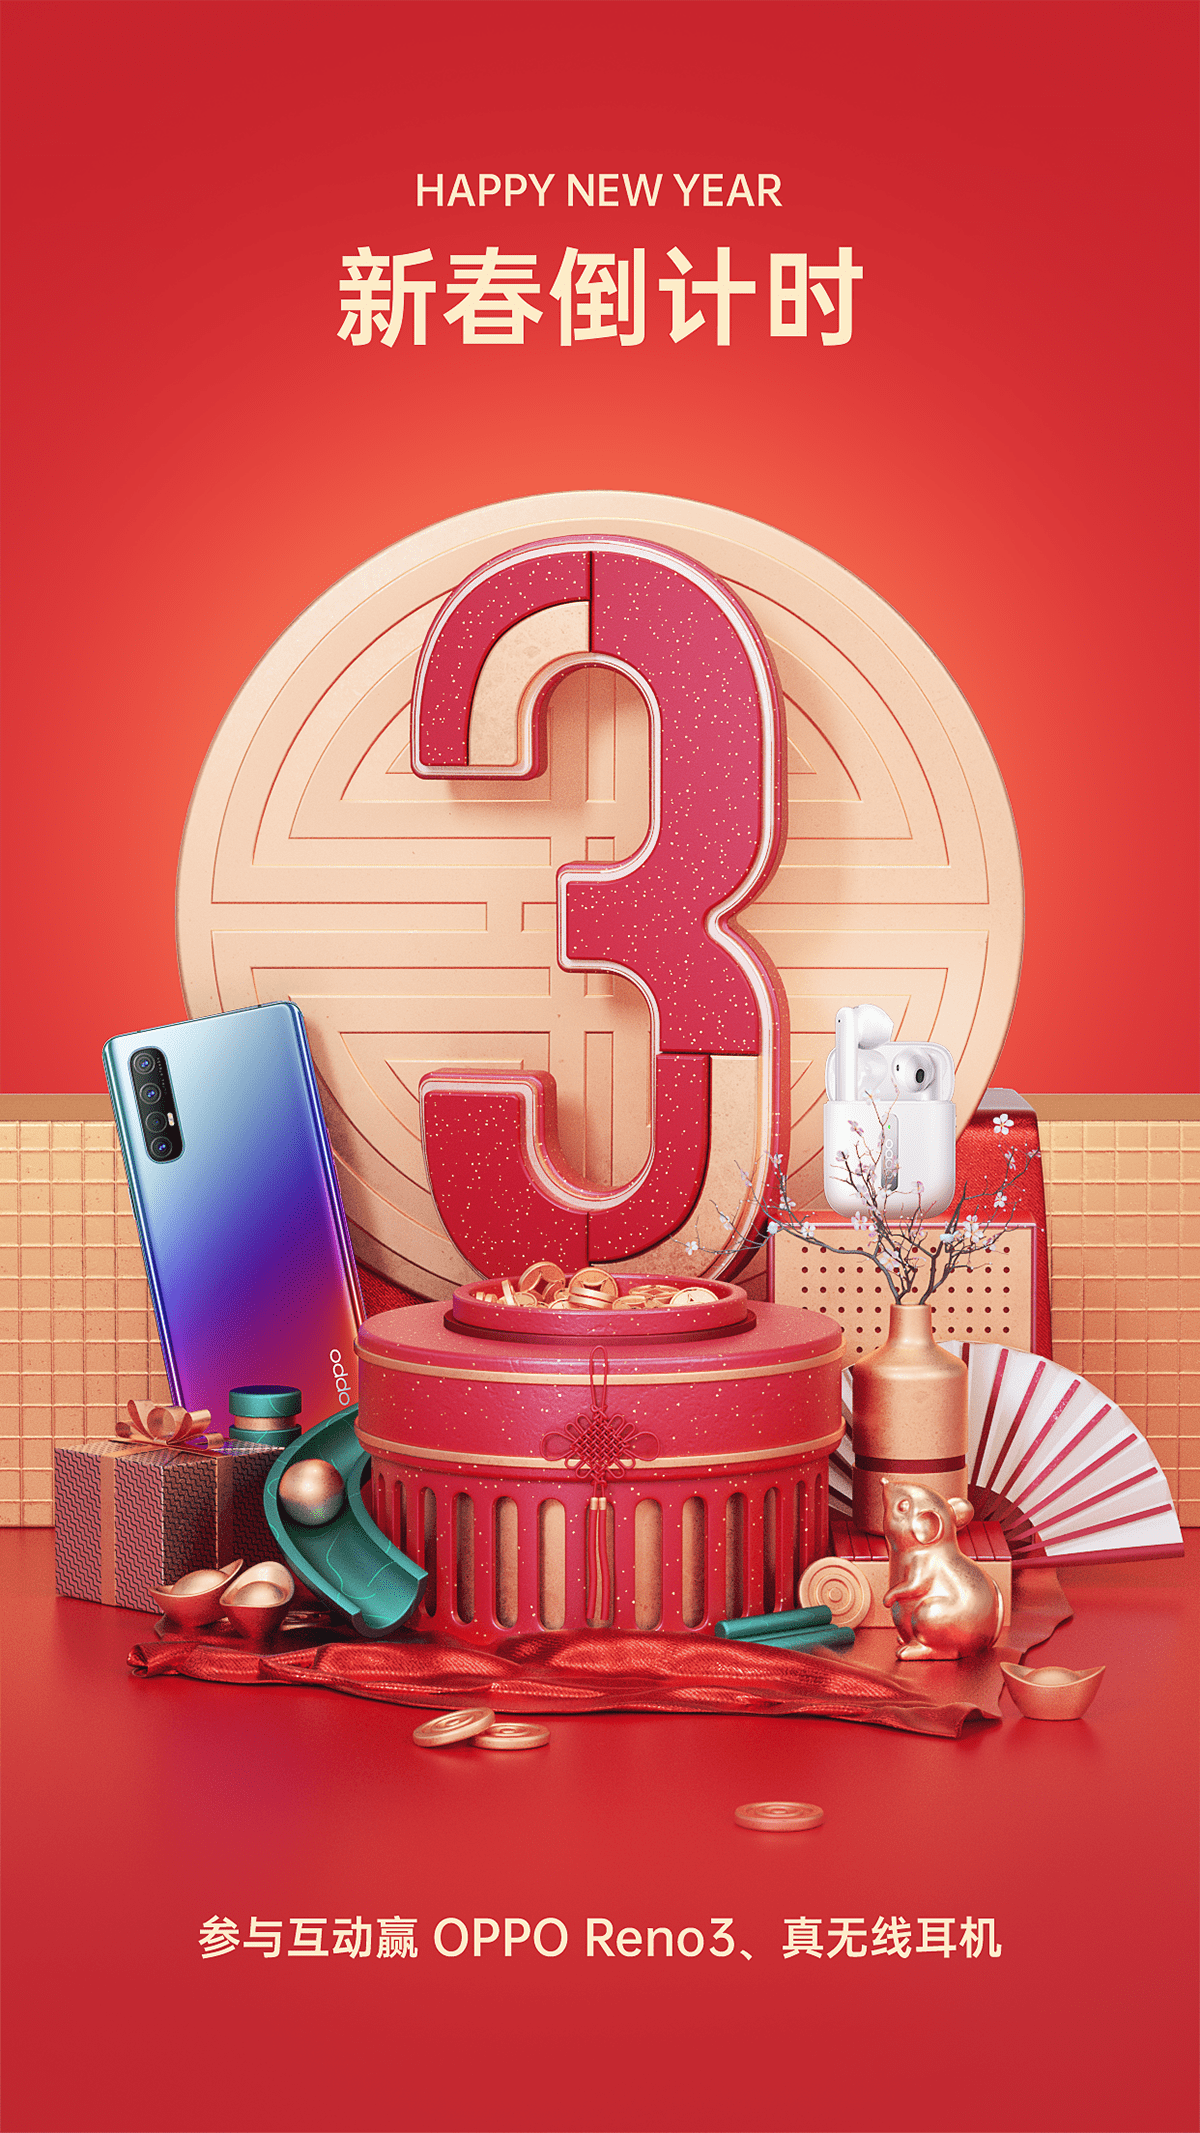 OPPO Happy Chinese New Year Countdown Poster on Behancea3af0591444031.5e32a2e06bf7d.png